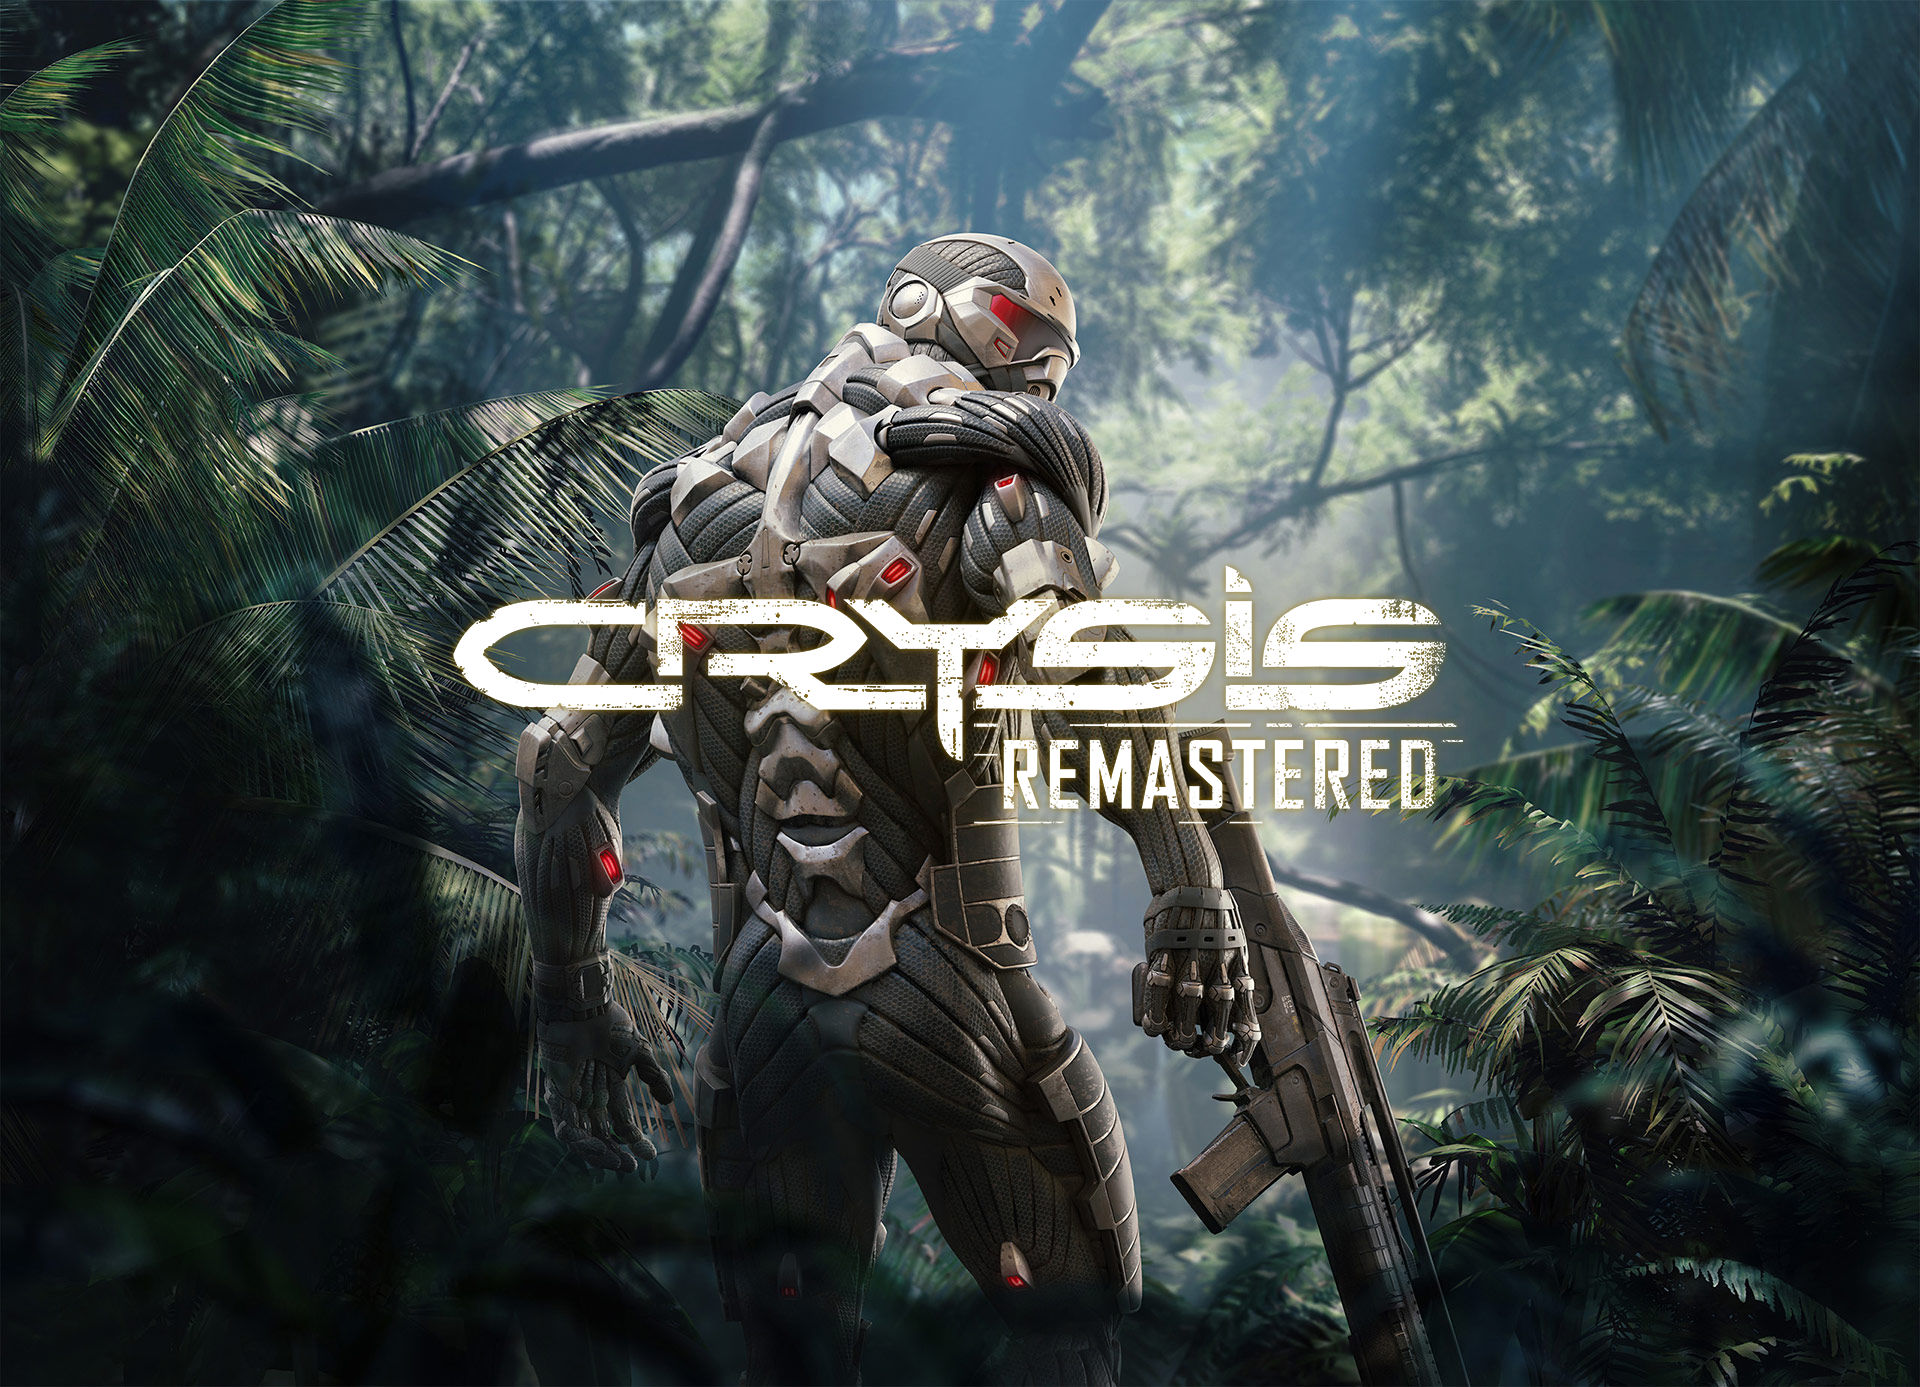 65 Trick Crysis remastered have multiplayer for Youtuber